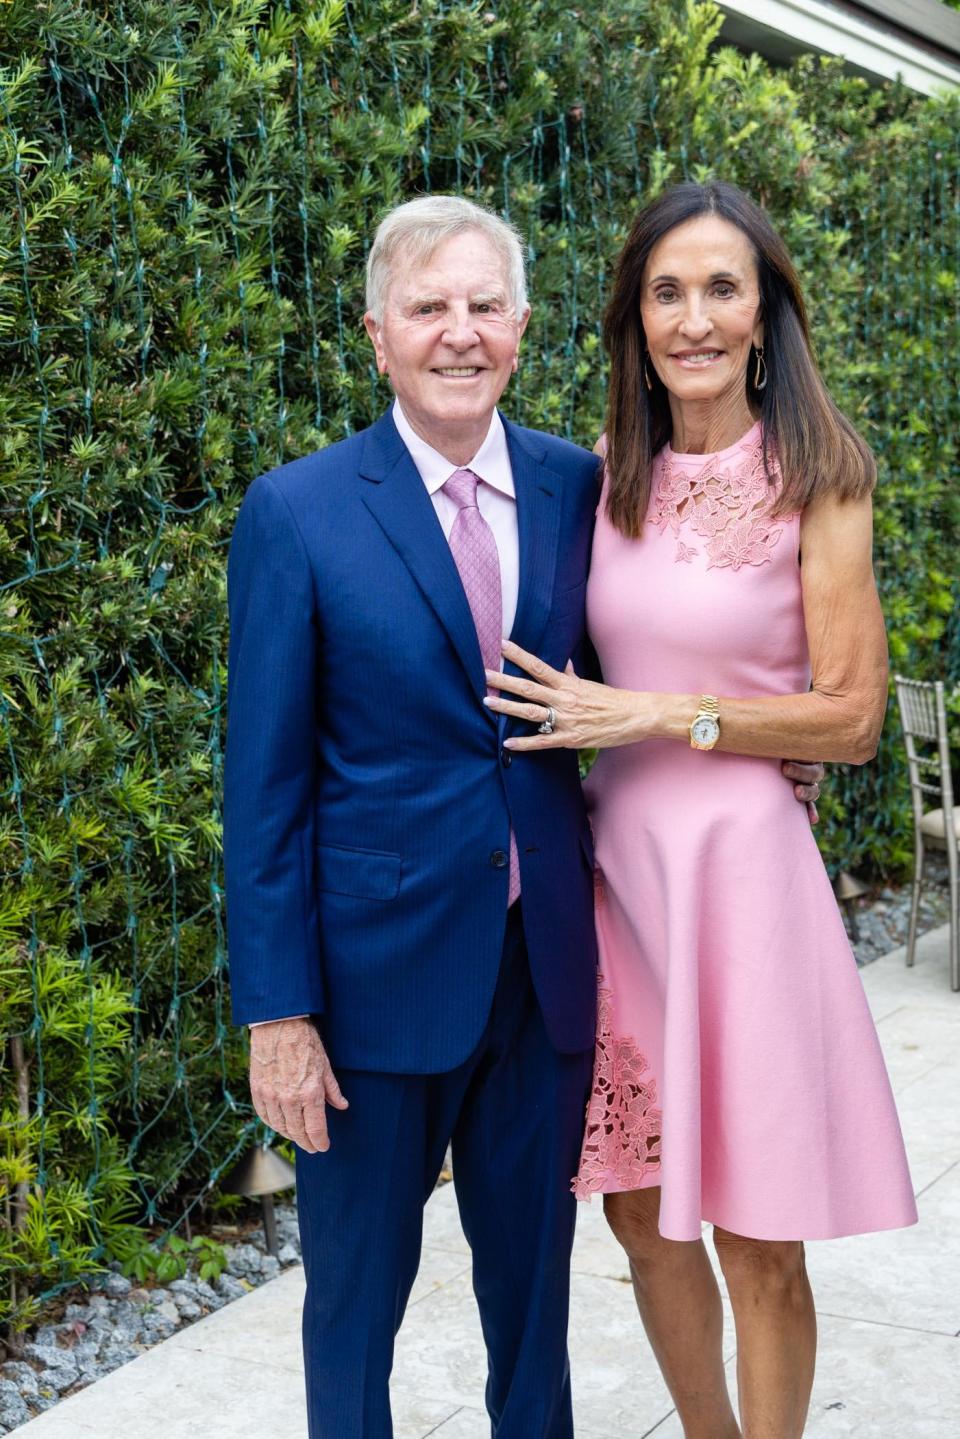 John and Diane Sculley at the Promise Fund of Florida Major Donor Dinner and Award Celebration in March. The next gala is slated for March 11.